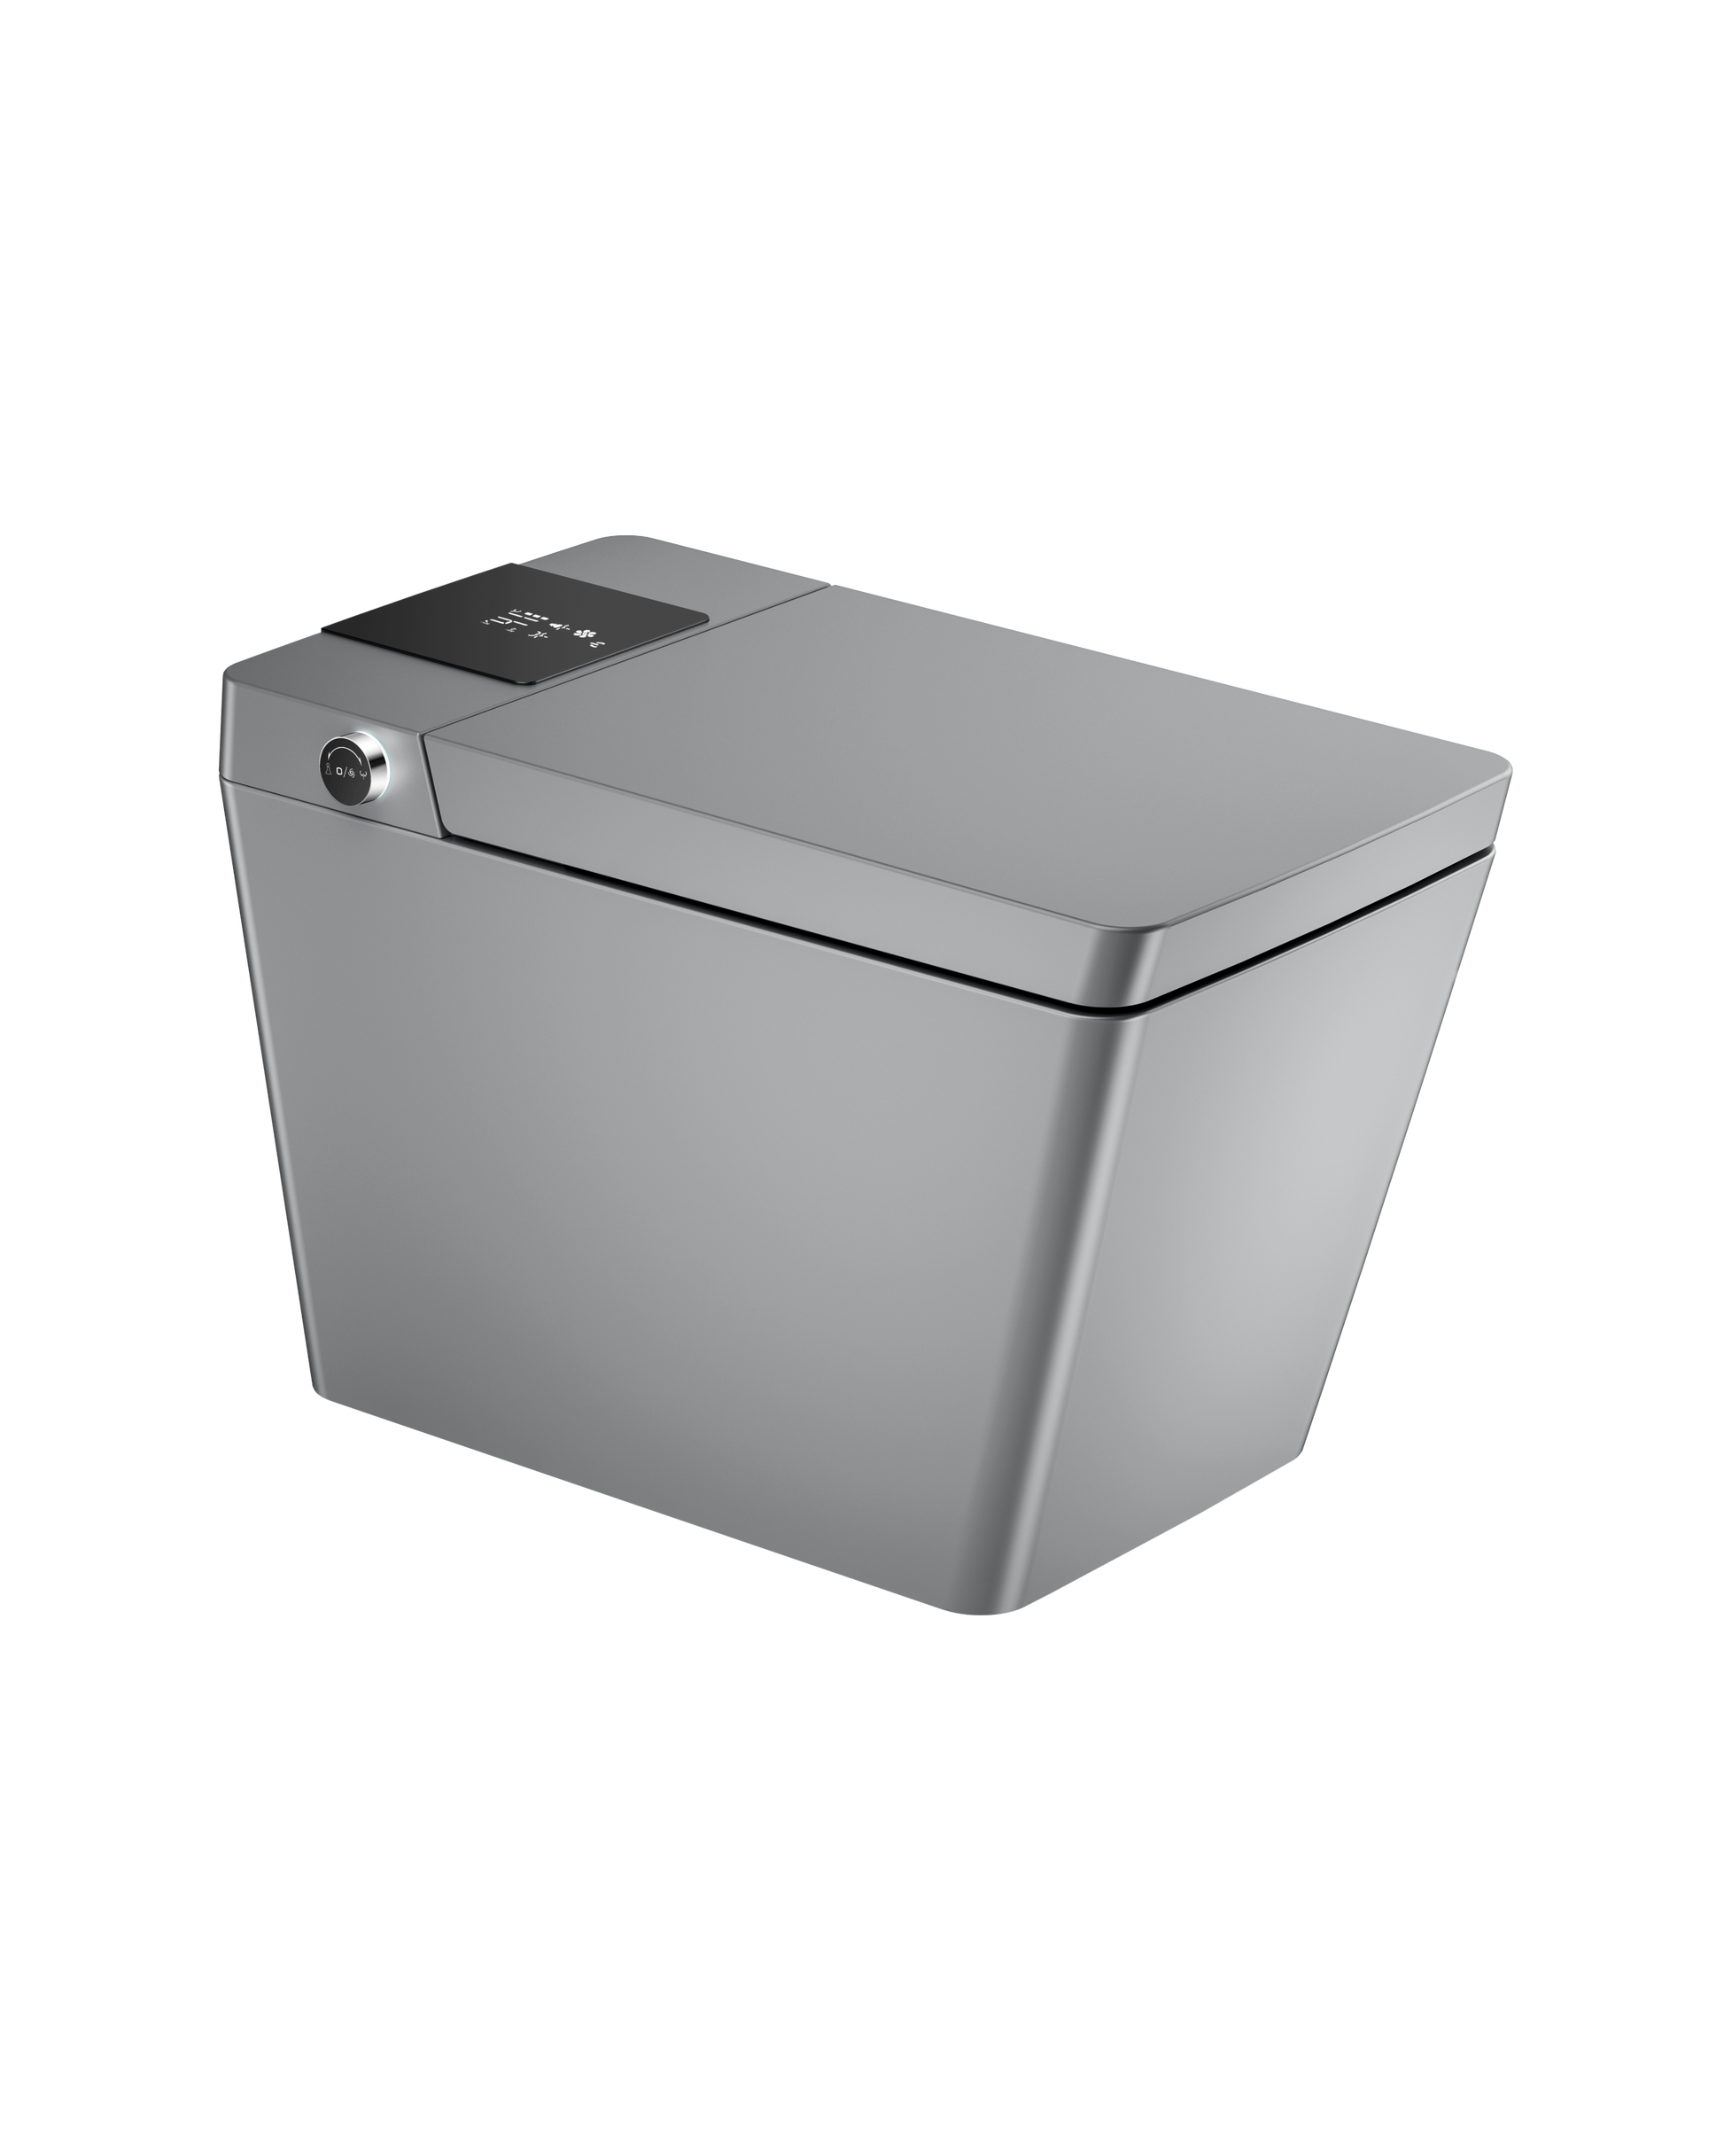 Multifunctional flat square smart toilet with grey-ceramic